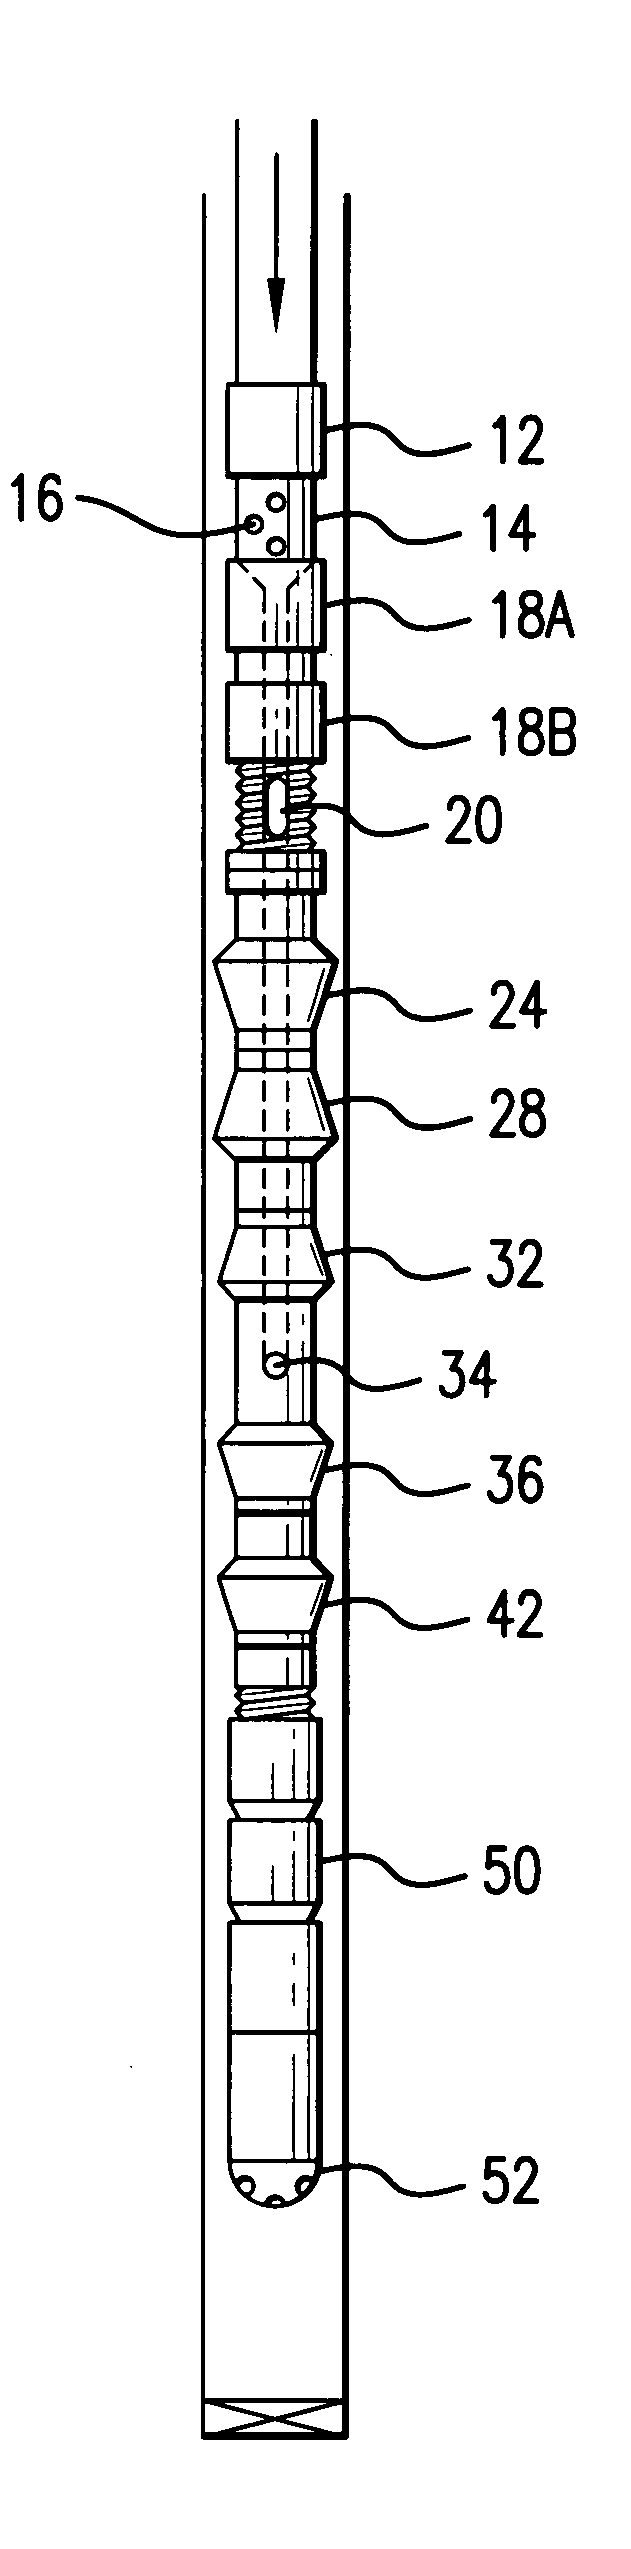 Method for simultaneous removal of asphaltene, and/or paraffin and scale from producing oil wells